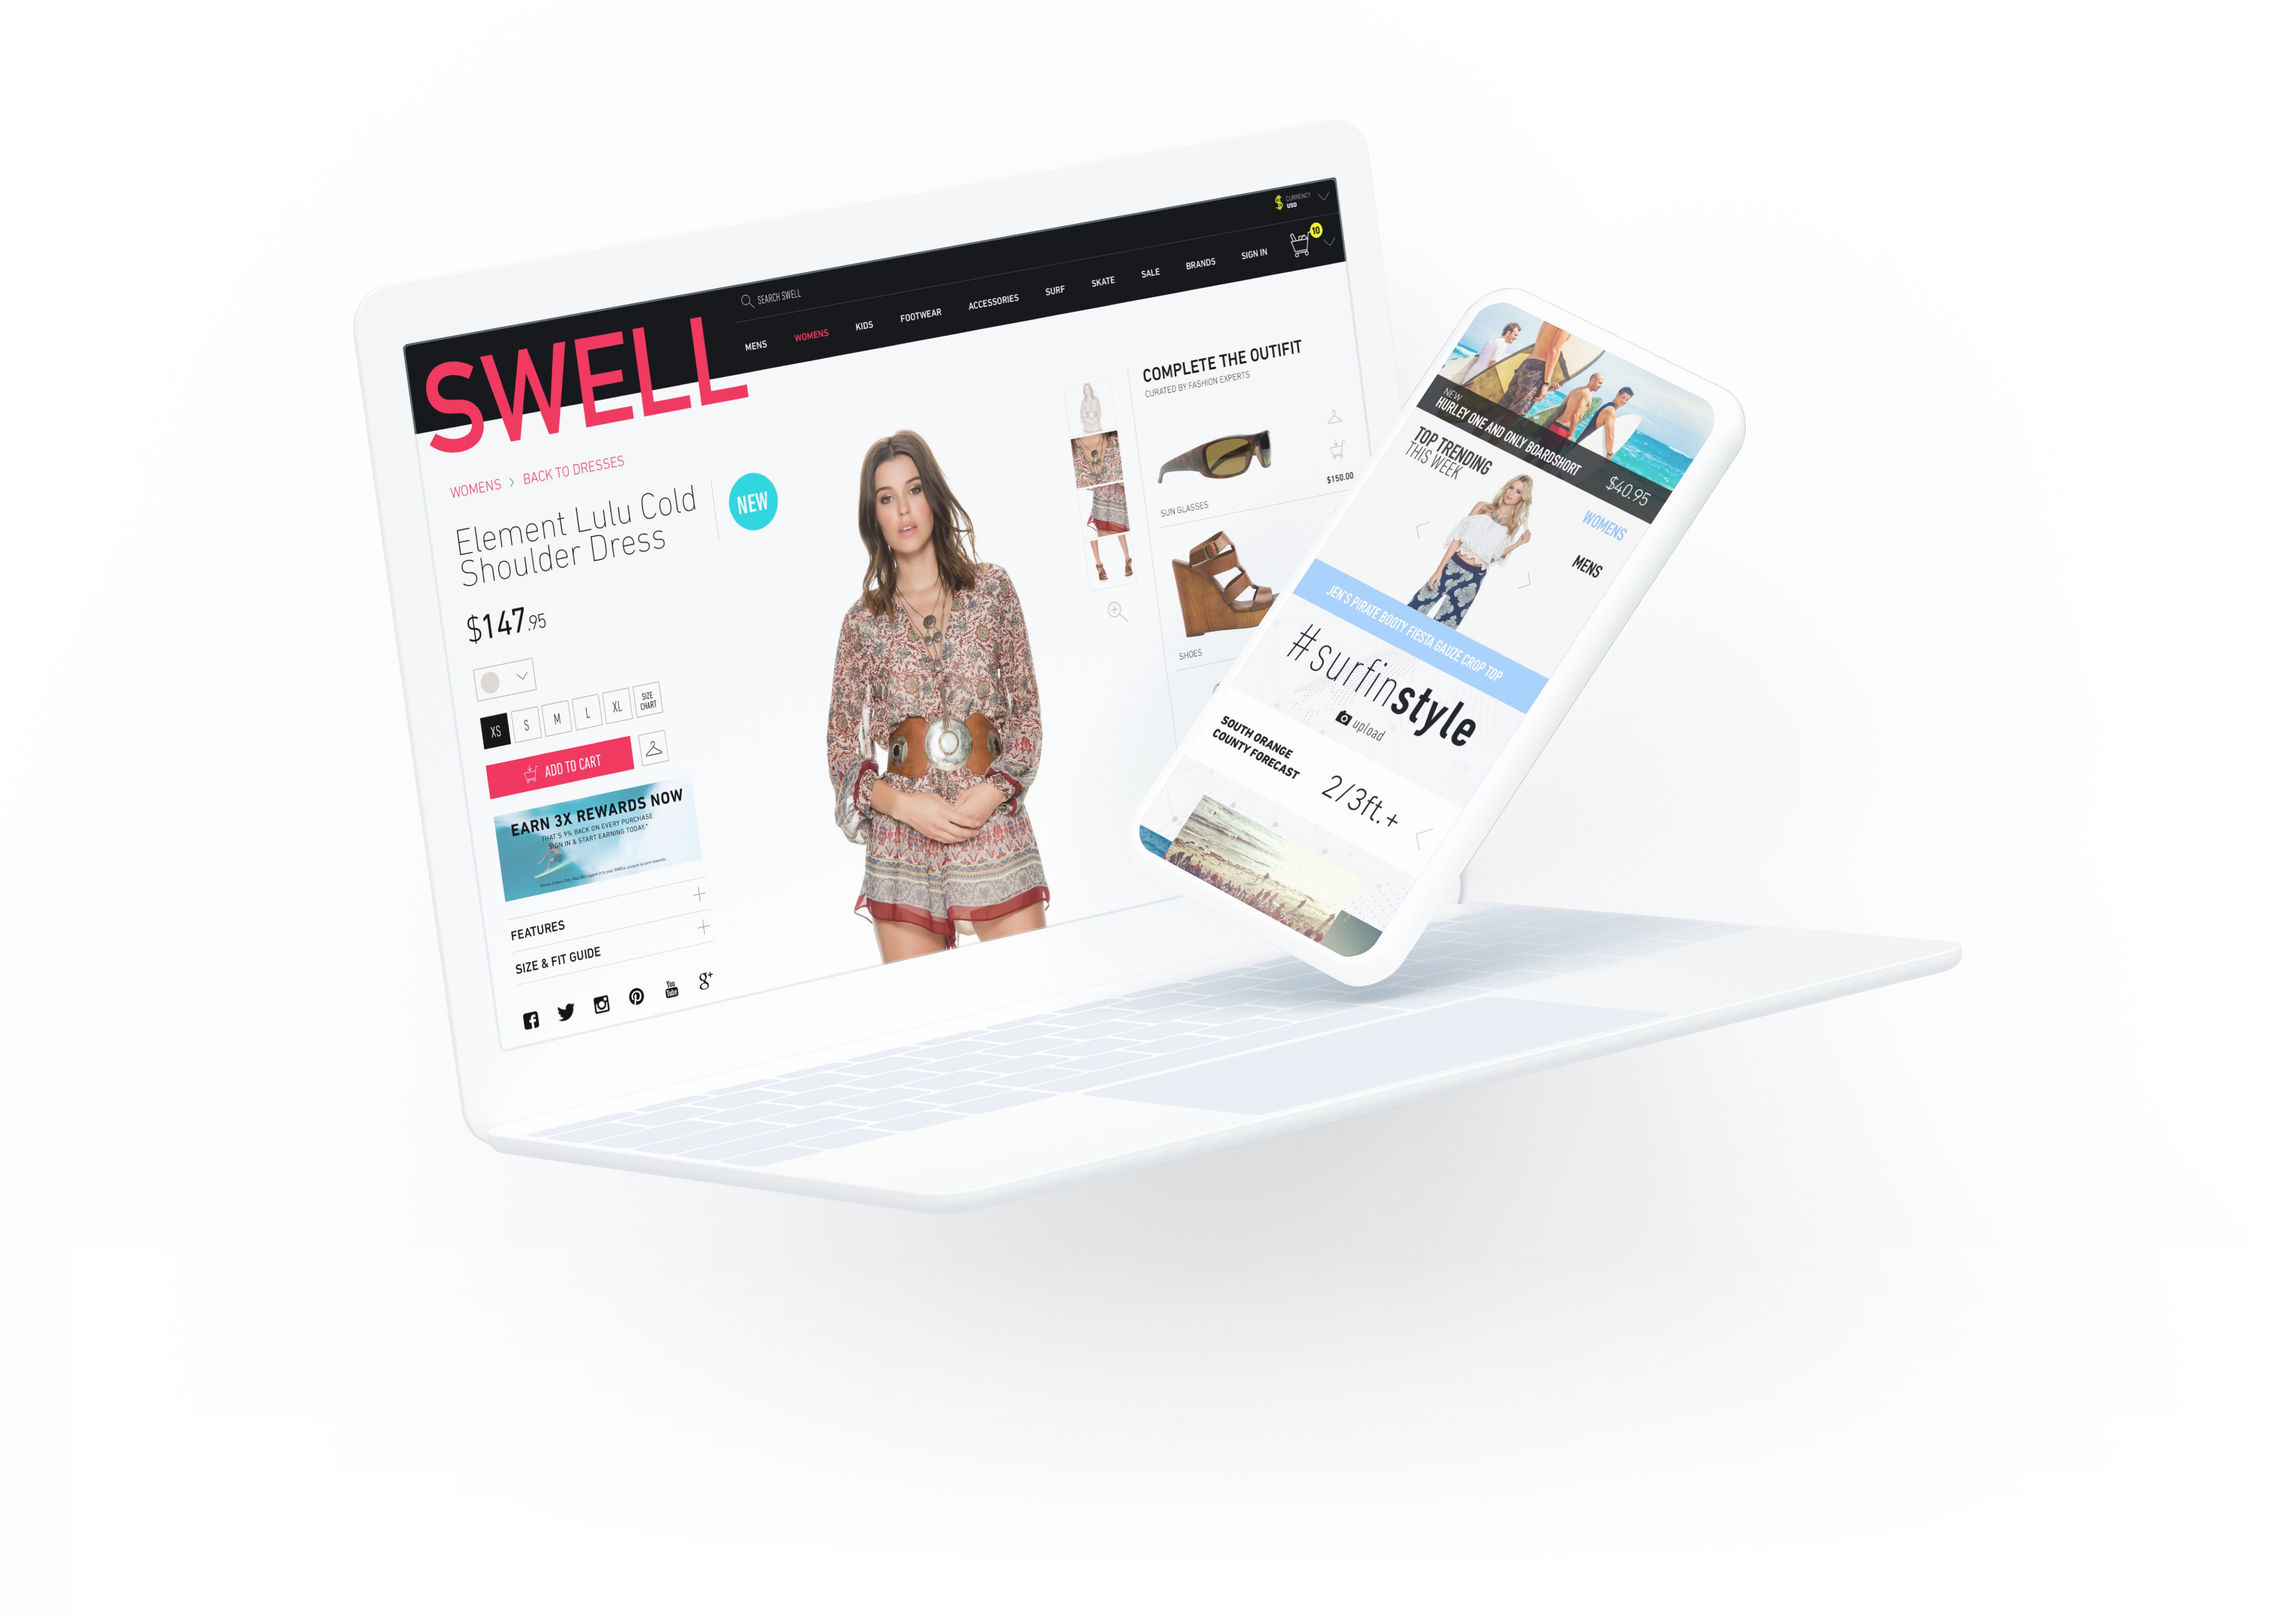 SWELL website mockup in laptop and mobile device